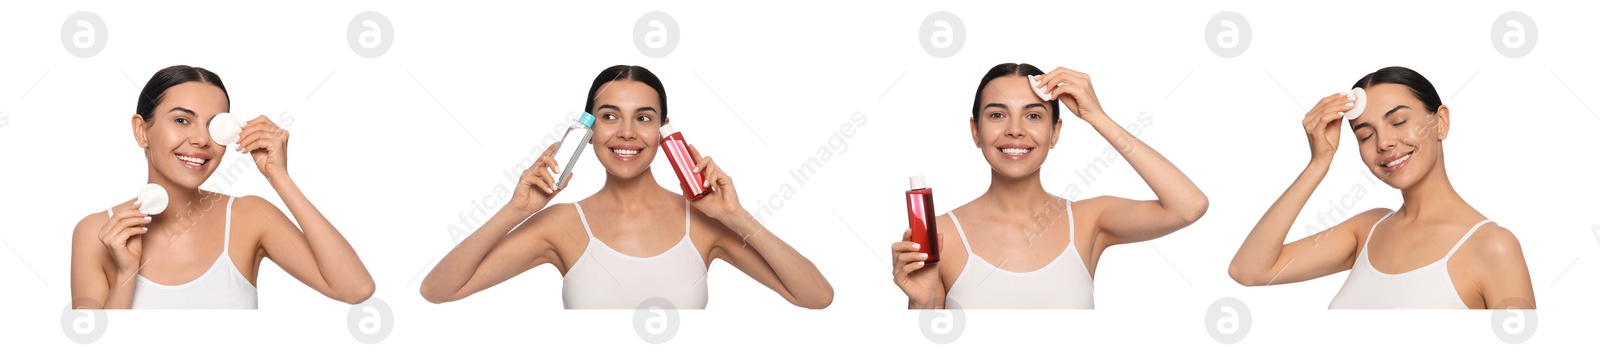 Image of Collage with photos of woman with micellar water on white background